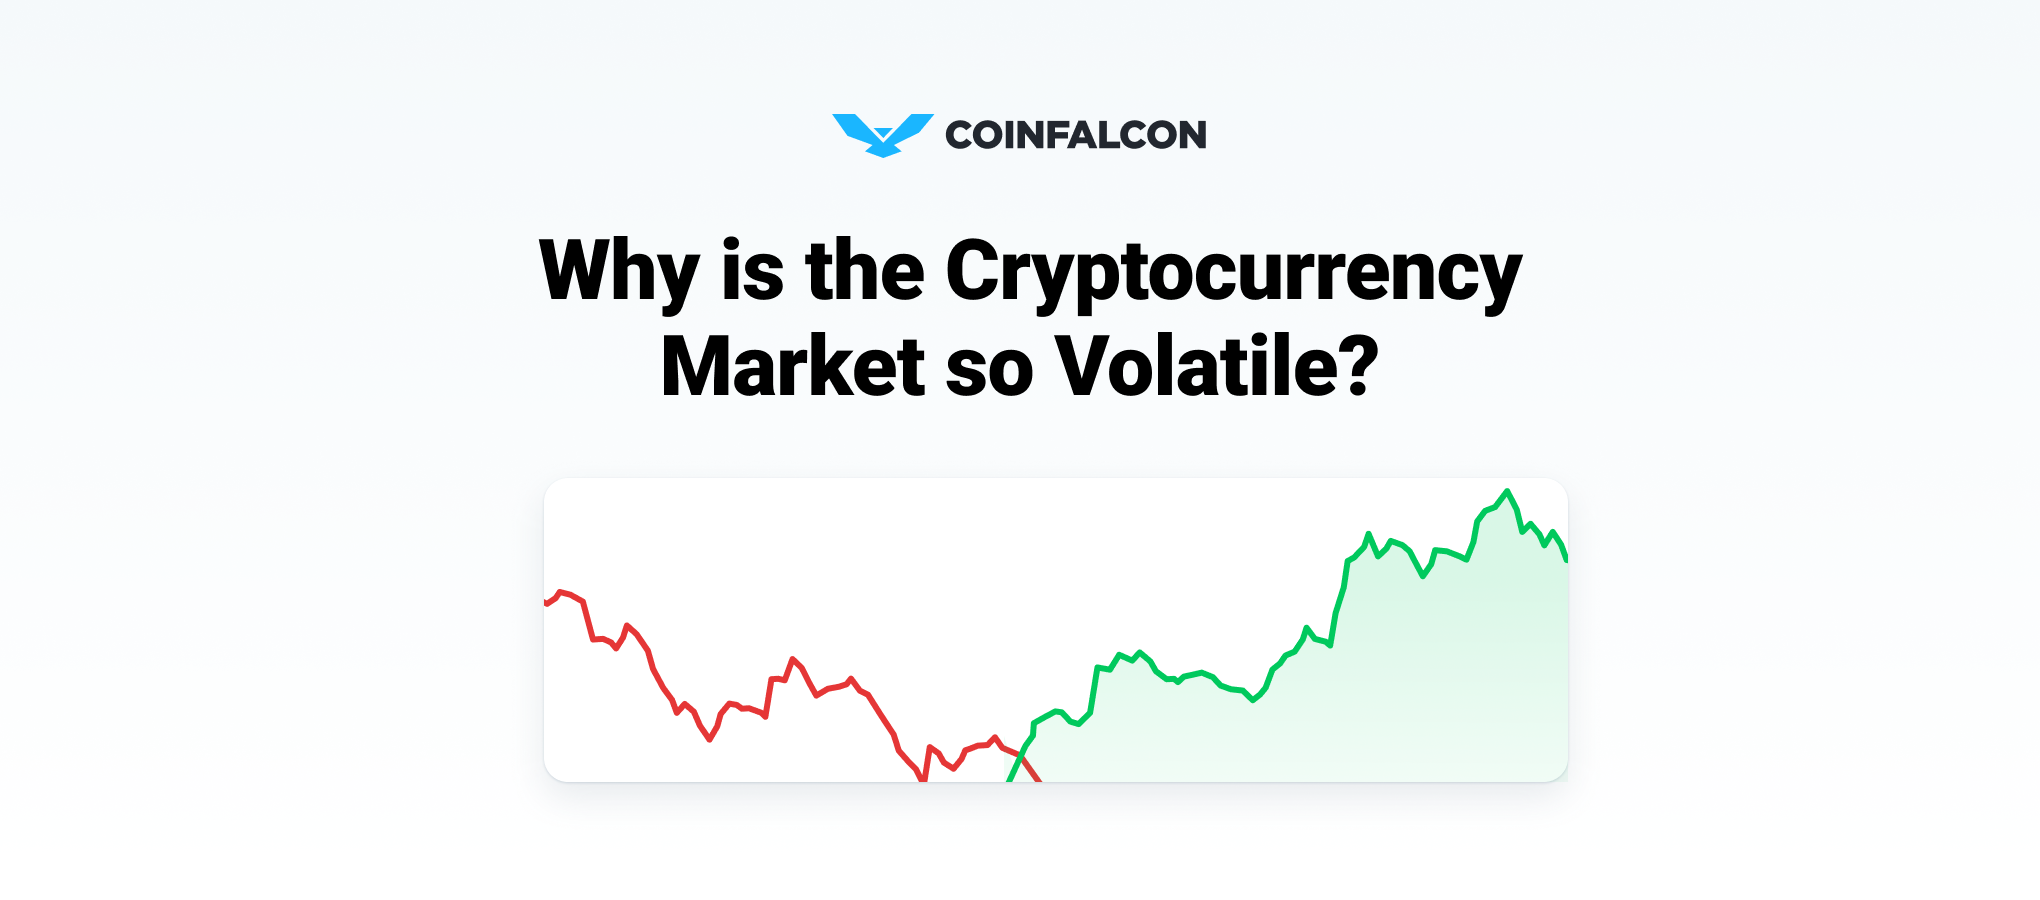 Why is the Cryptocurrency Market so Volatile?